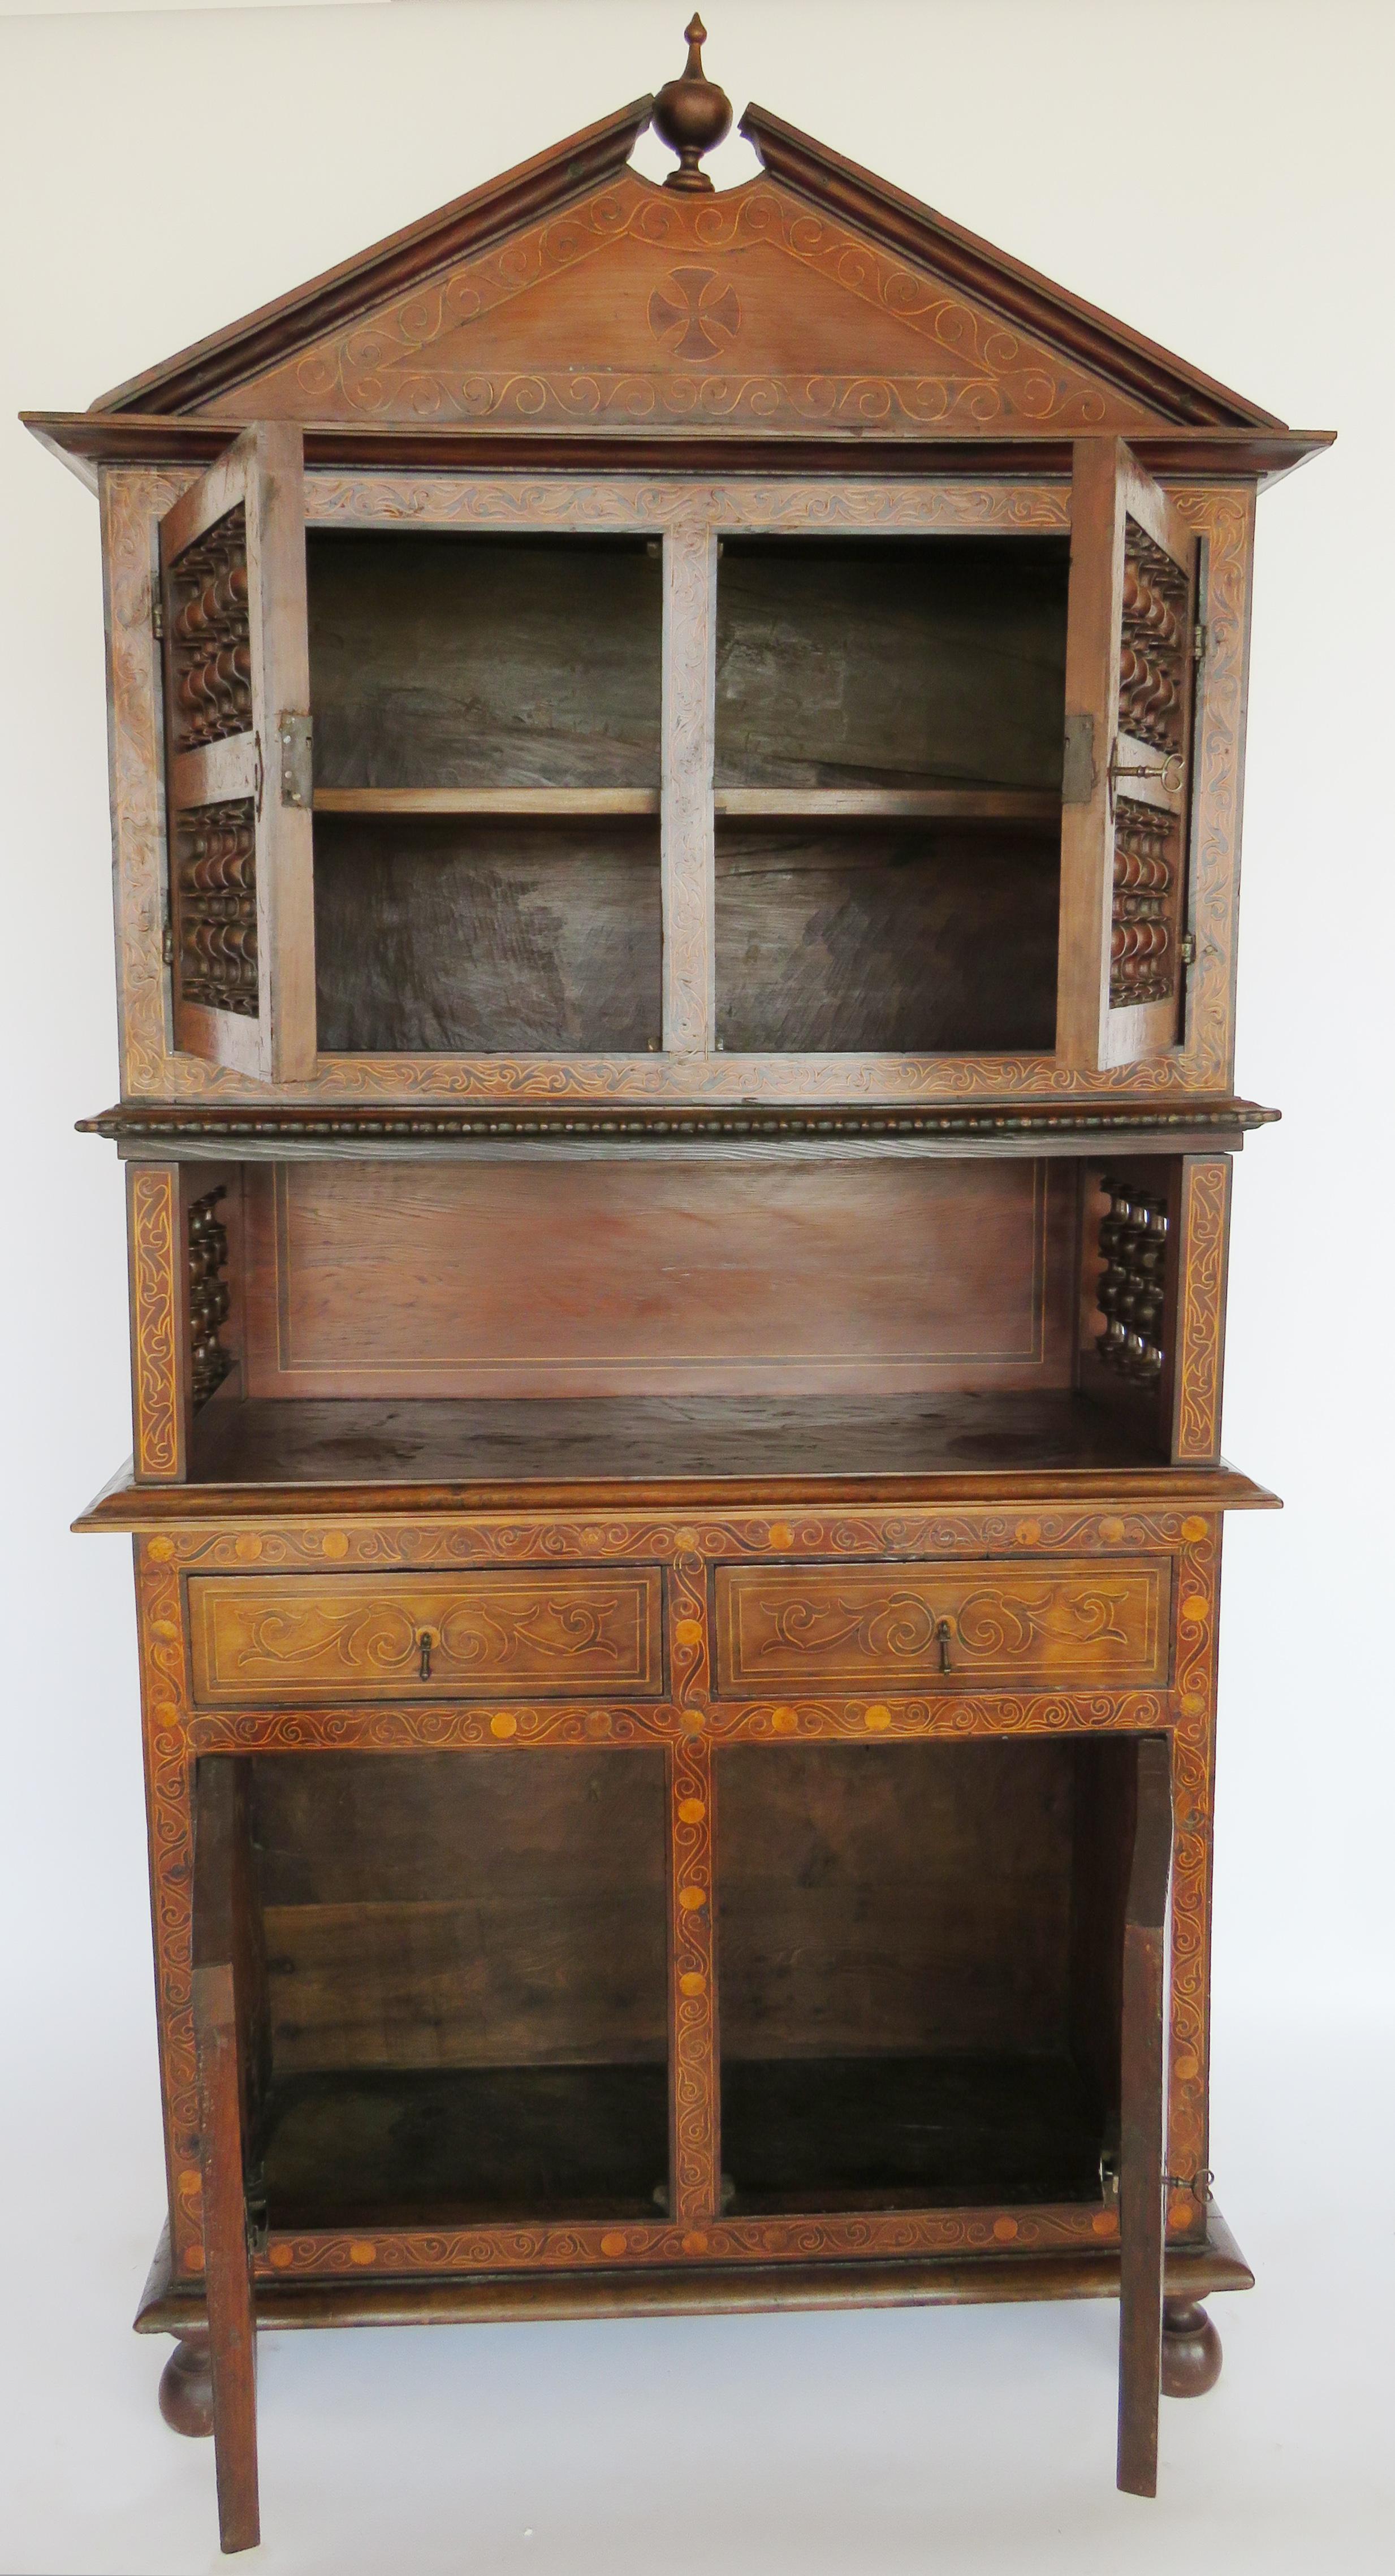 Three storied lemon inlaid marquetry cabinet. Upper storey has a peaked pediment over double doors with turned spindles on front and sides. Special attention to the minute scrolling inlay on door surrounds. Middle storey has a rectangular fluted top